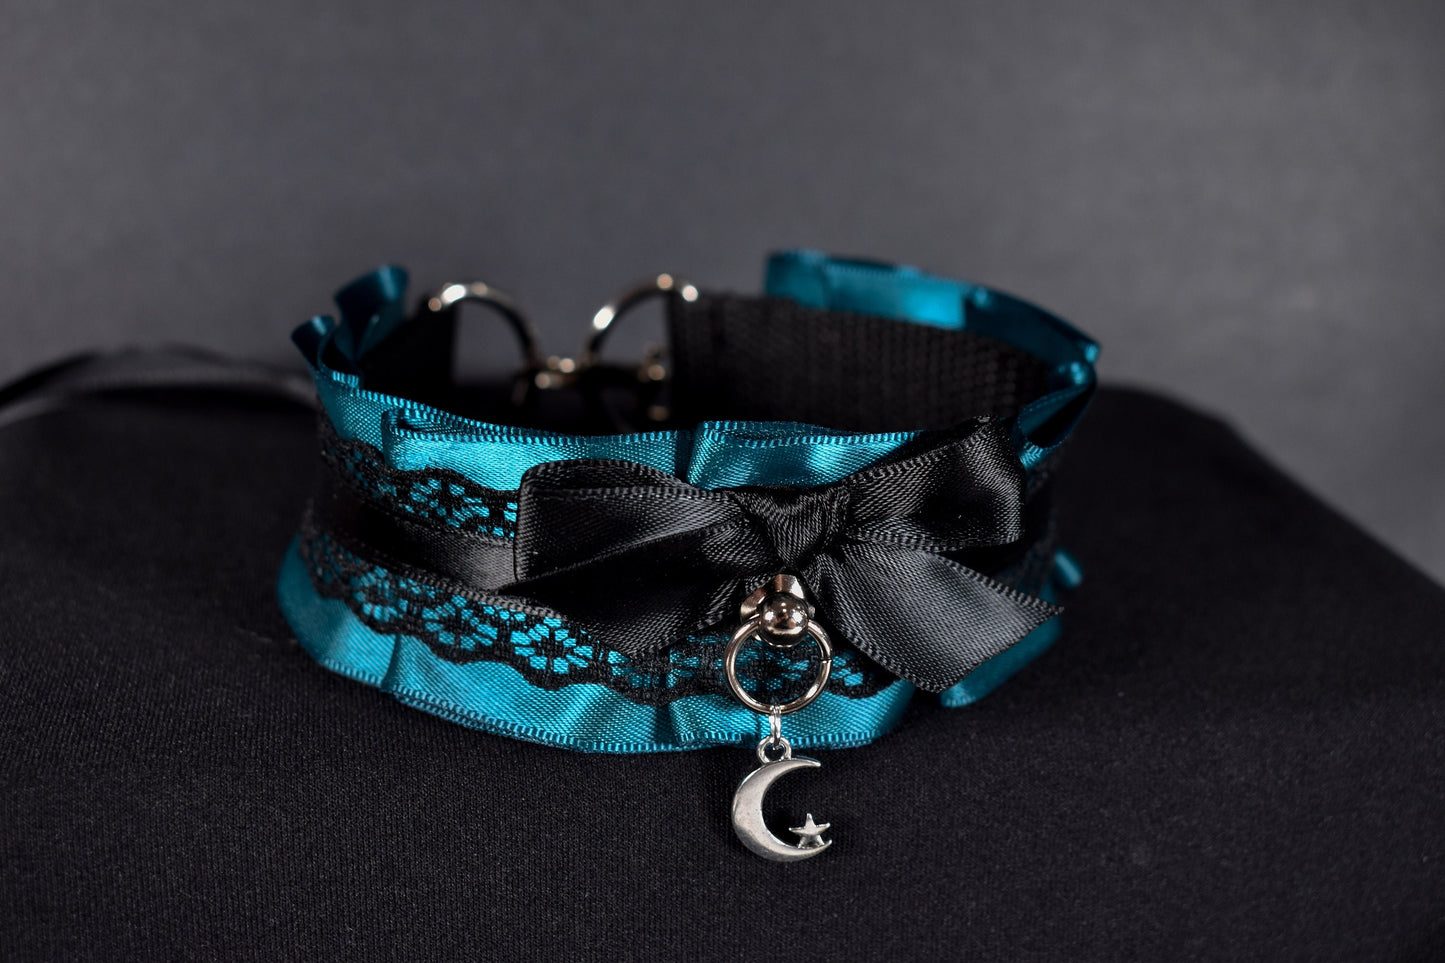 Made to your size / Teal moon choker / goth / emo / kitten play / alt fashion / bdsm / pet play necklace / kawaii fashion